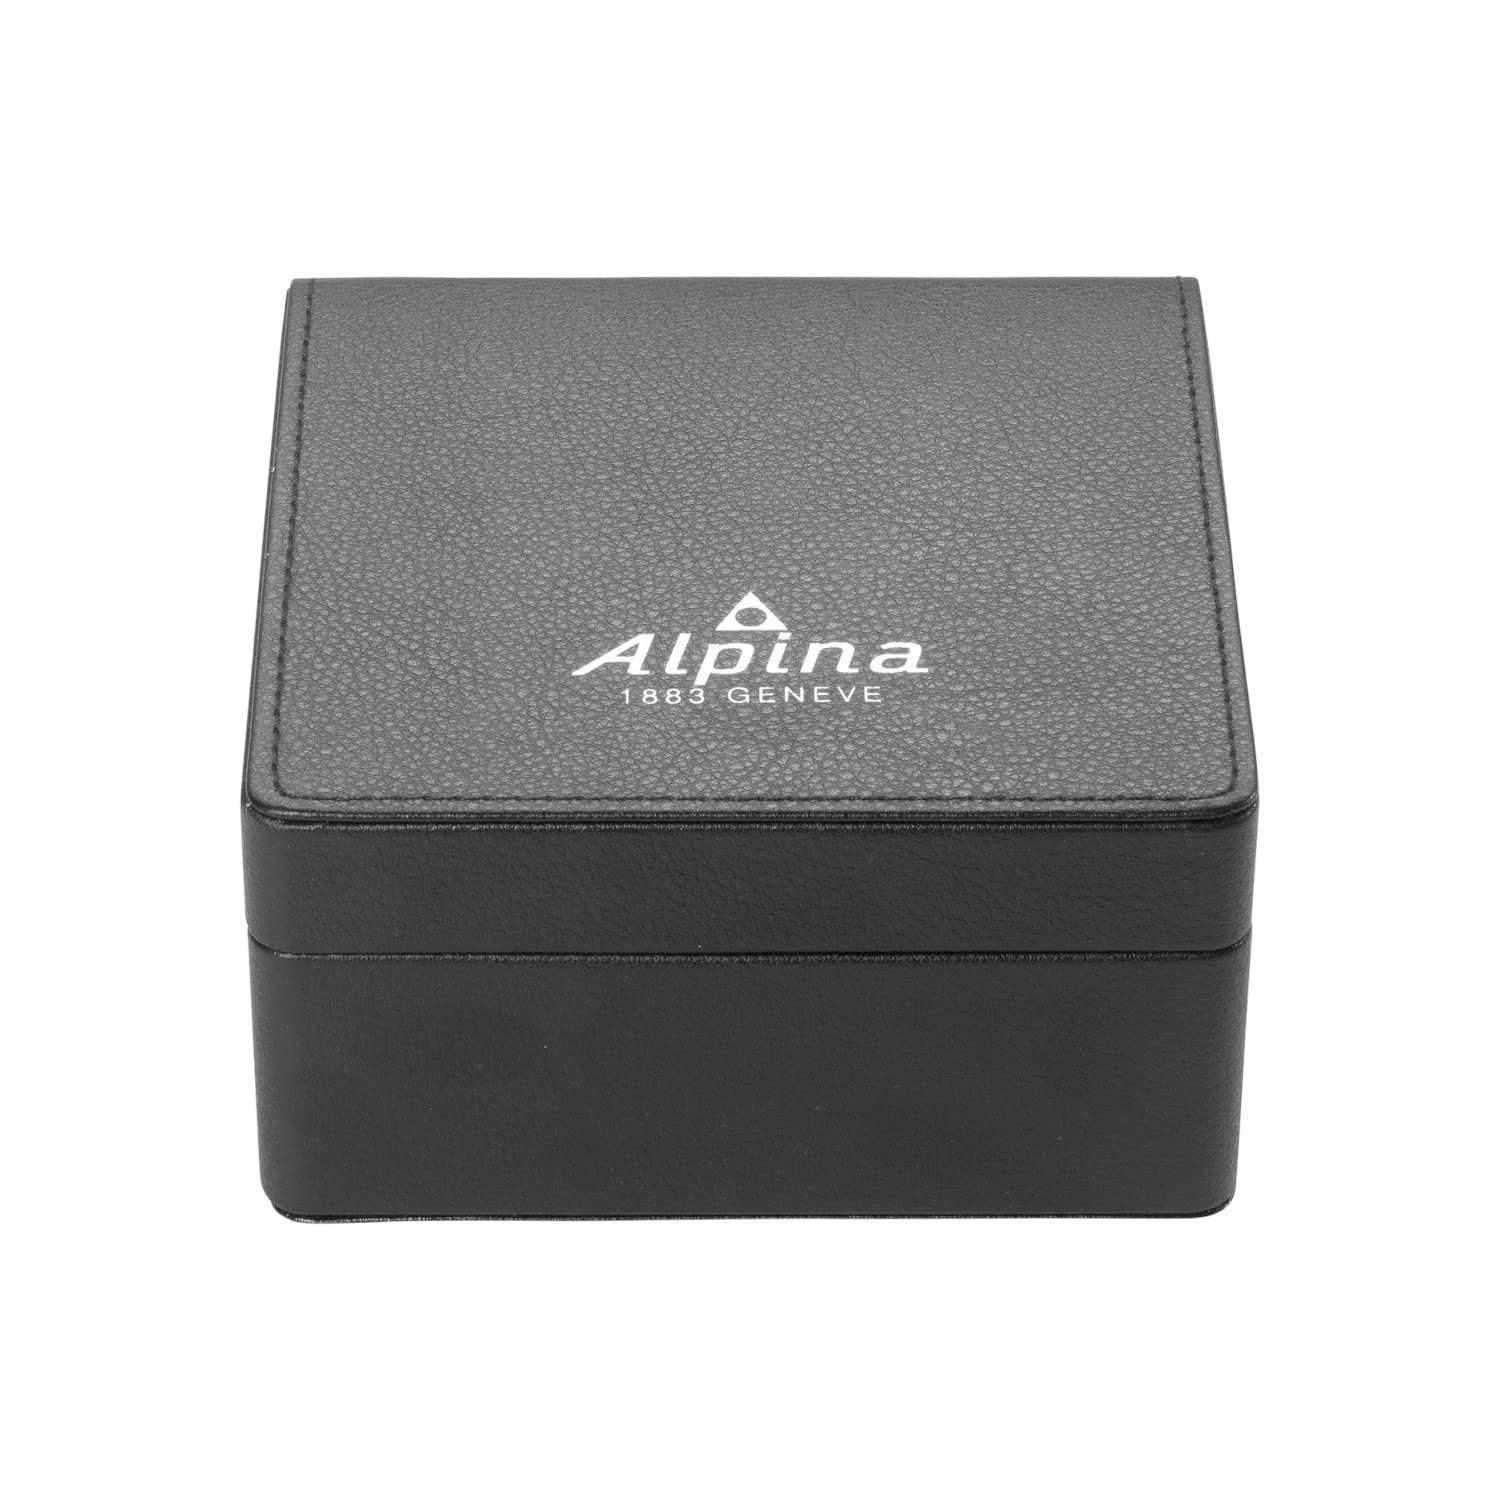 Alpina Men's SEASTRONG Stainless Steel Automatic Sport Watch with Leather Strap, 21 (Model: AL-520BY4H6), Silver-Tone and Black